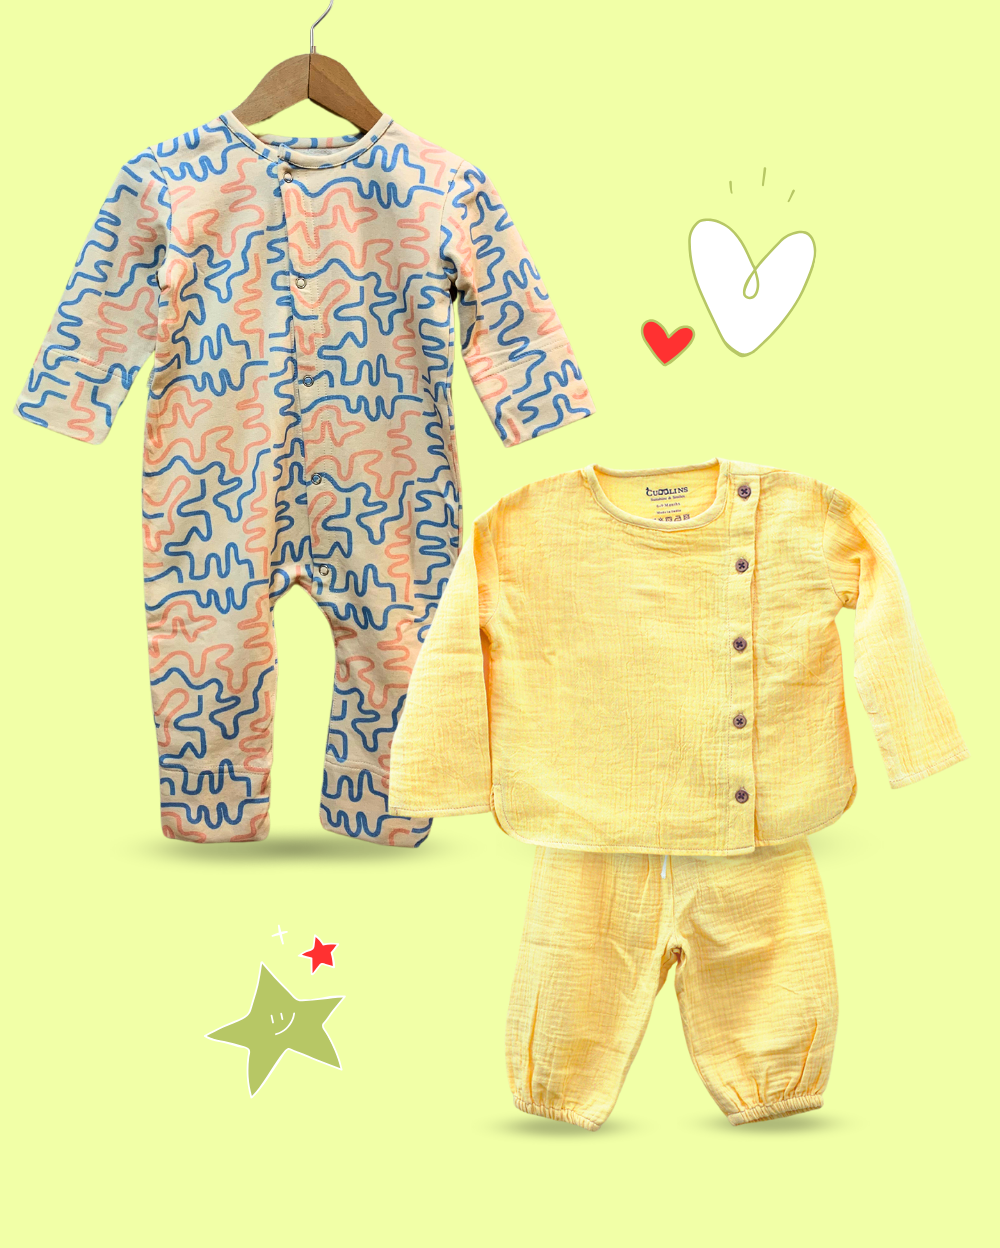 100% Cotton Printed Sleepsuit & Yellow Baby Set for Babies - 2 Piece Set